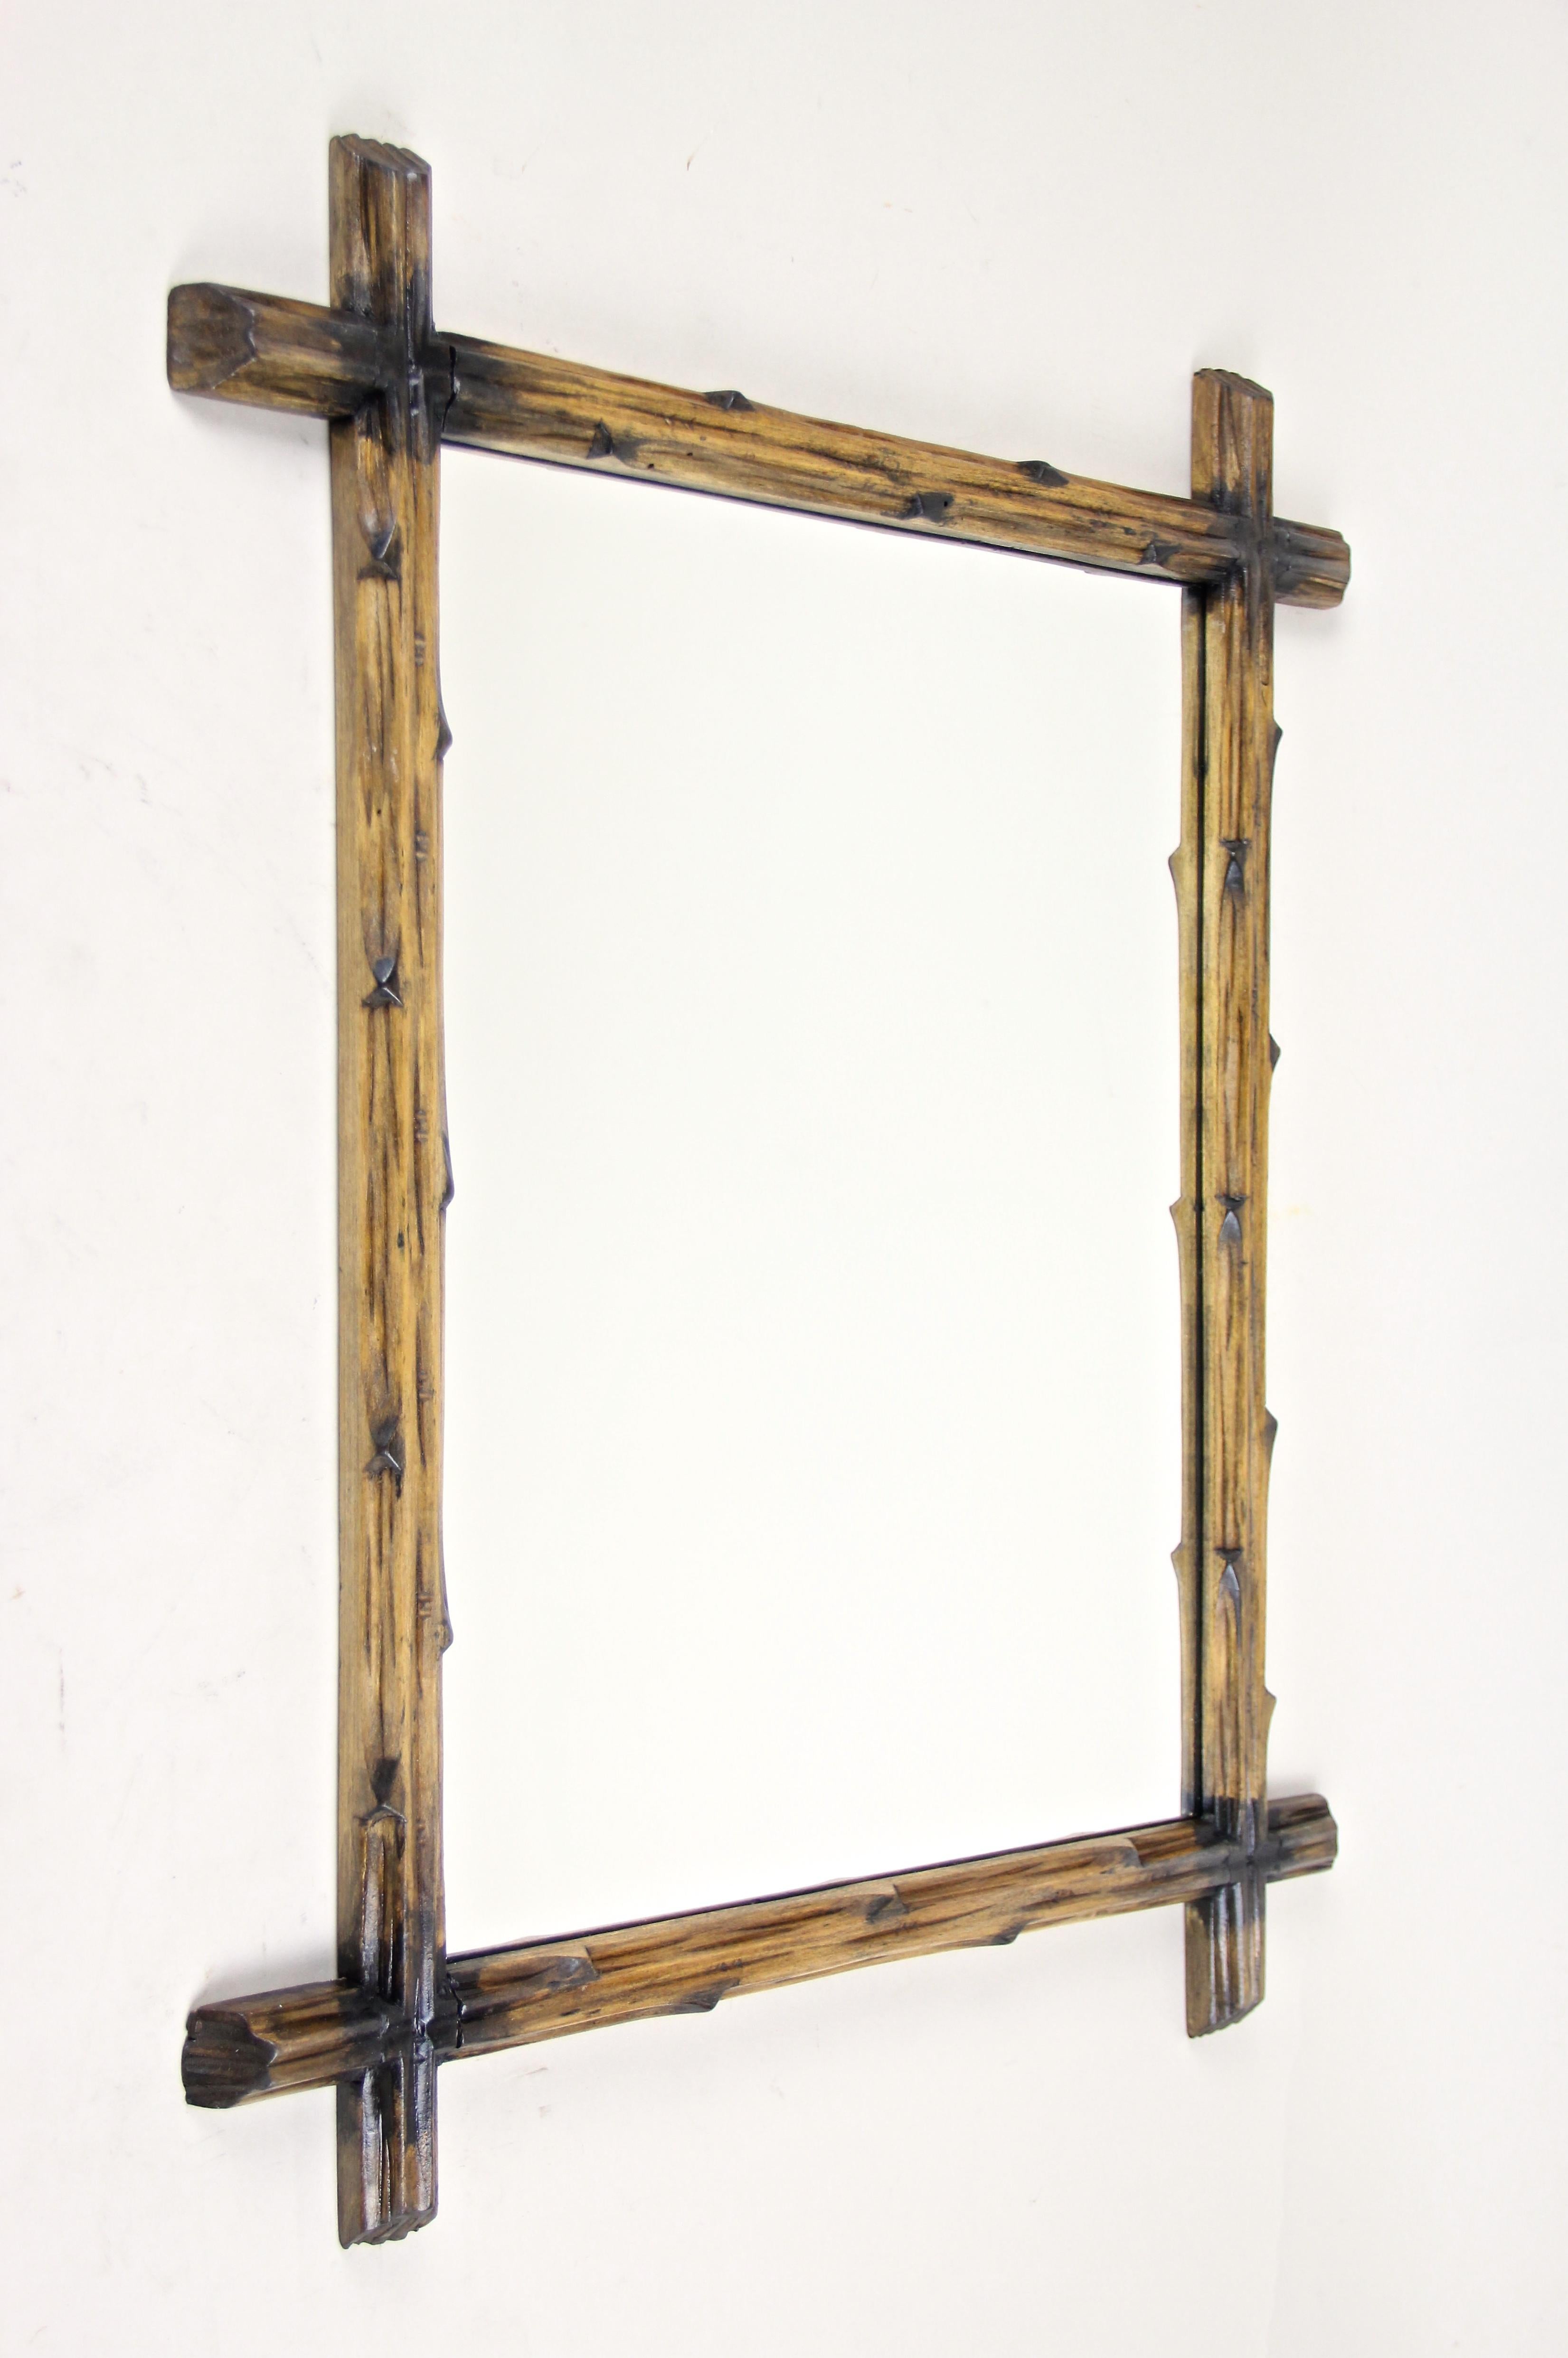 Unusual rustic Black Forest wall mirror out of Austria. From circa 1890 comes this lovely hand carved Black Forest wall mirror with a simple but elegant design, created out of basswood and showing the typical 